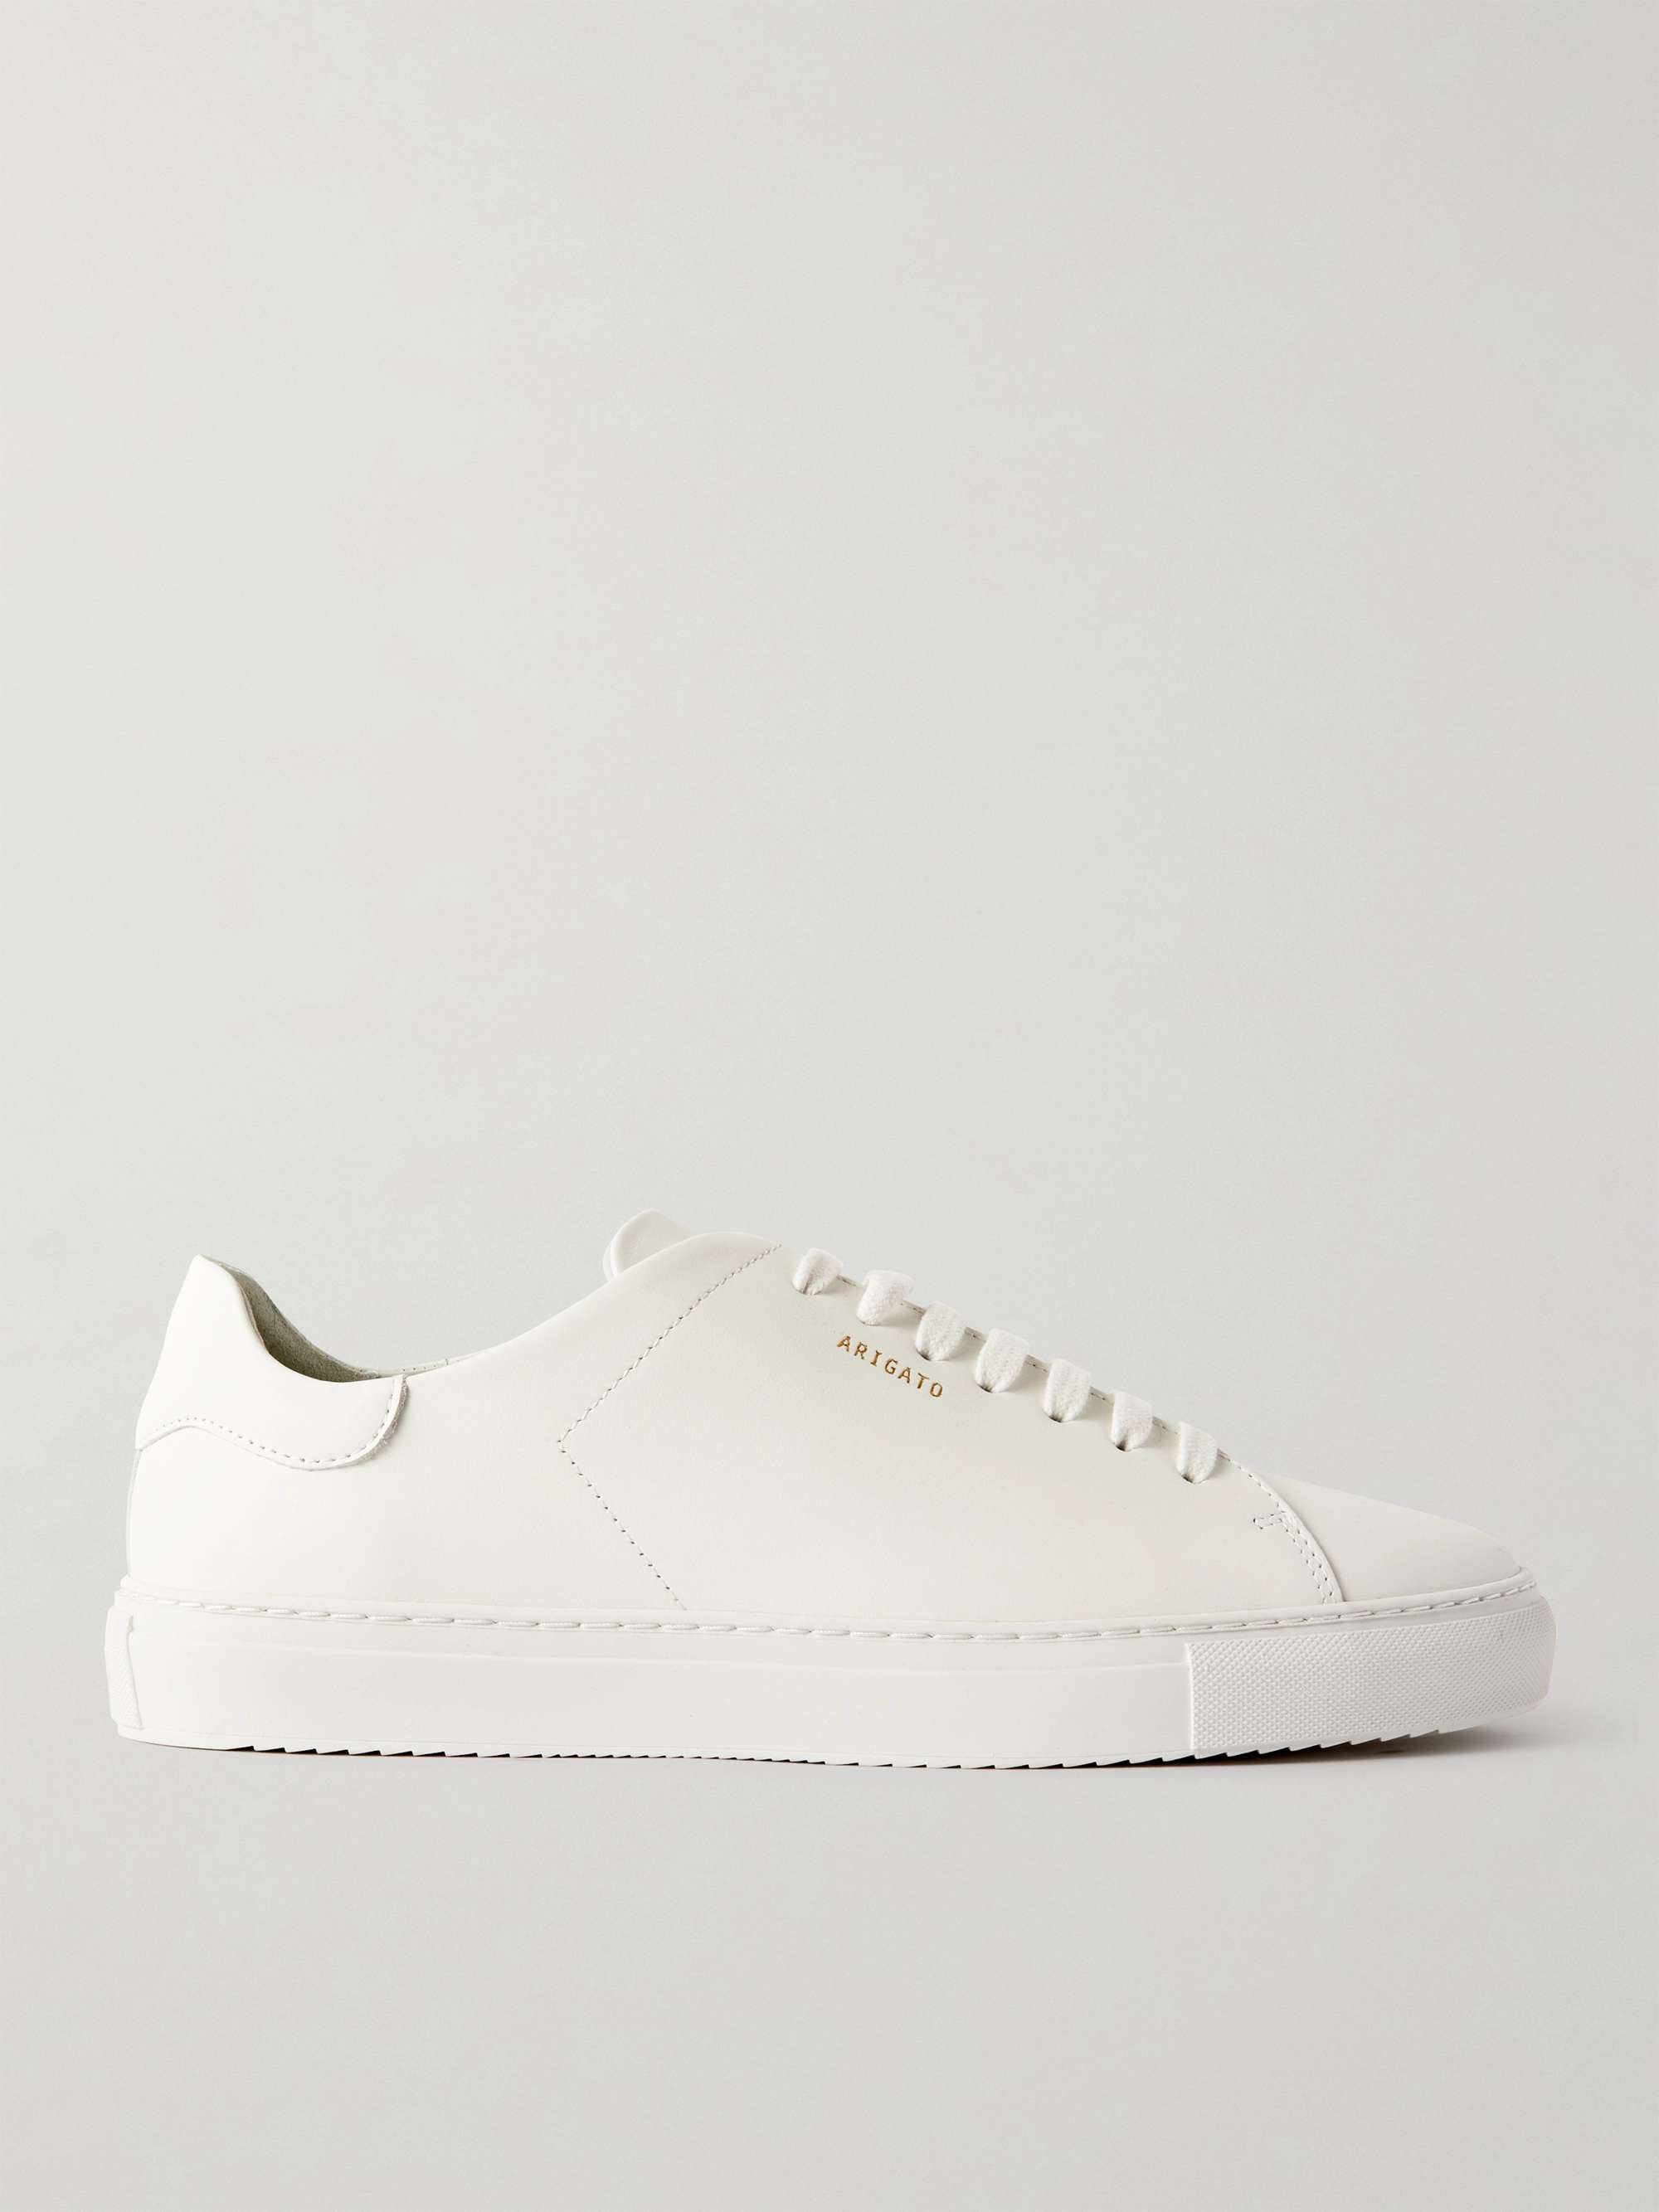 White Clean 90 Leather Sneakers | AXEL ARIGATO | MR PORTER